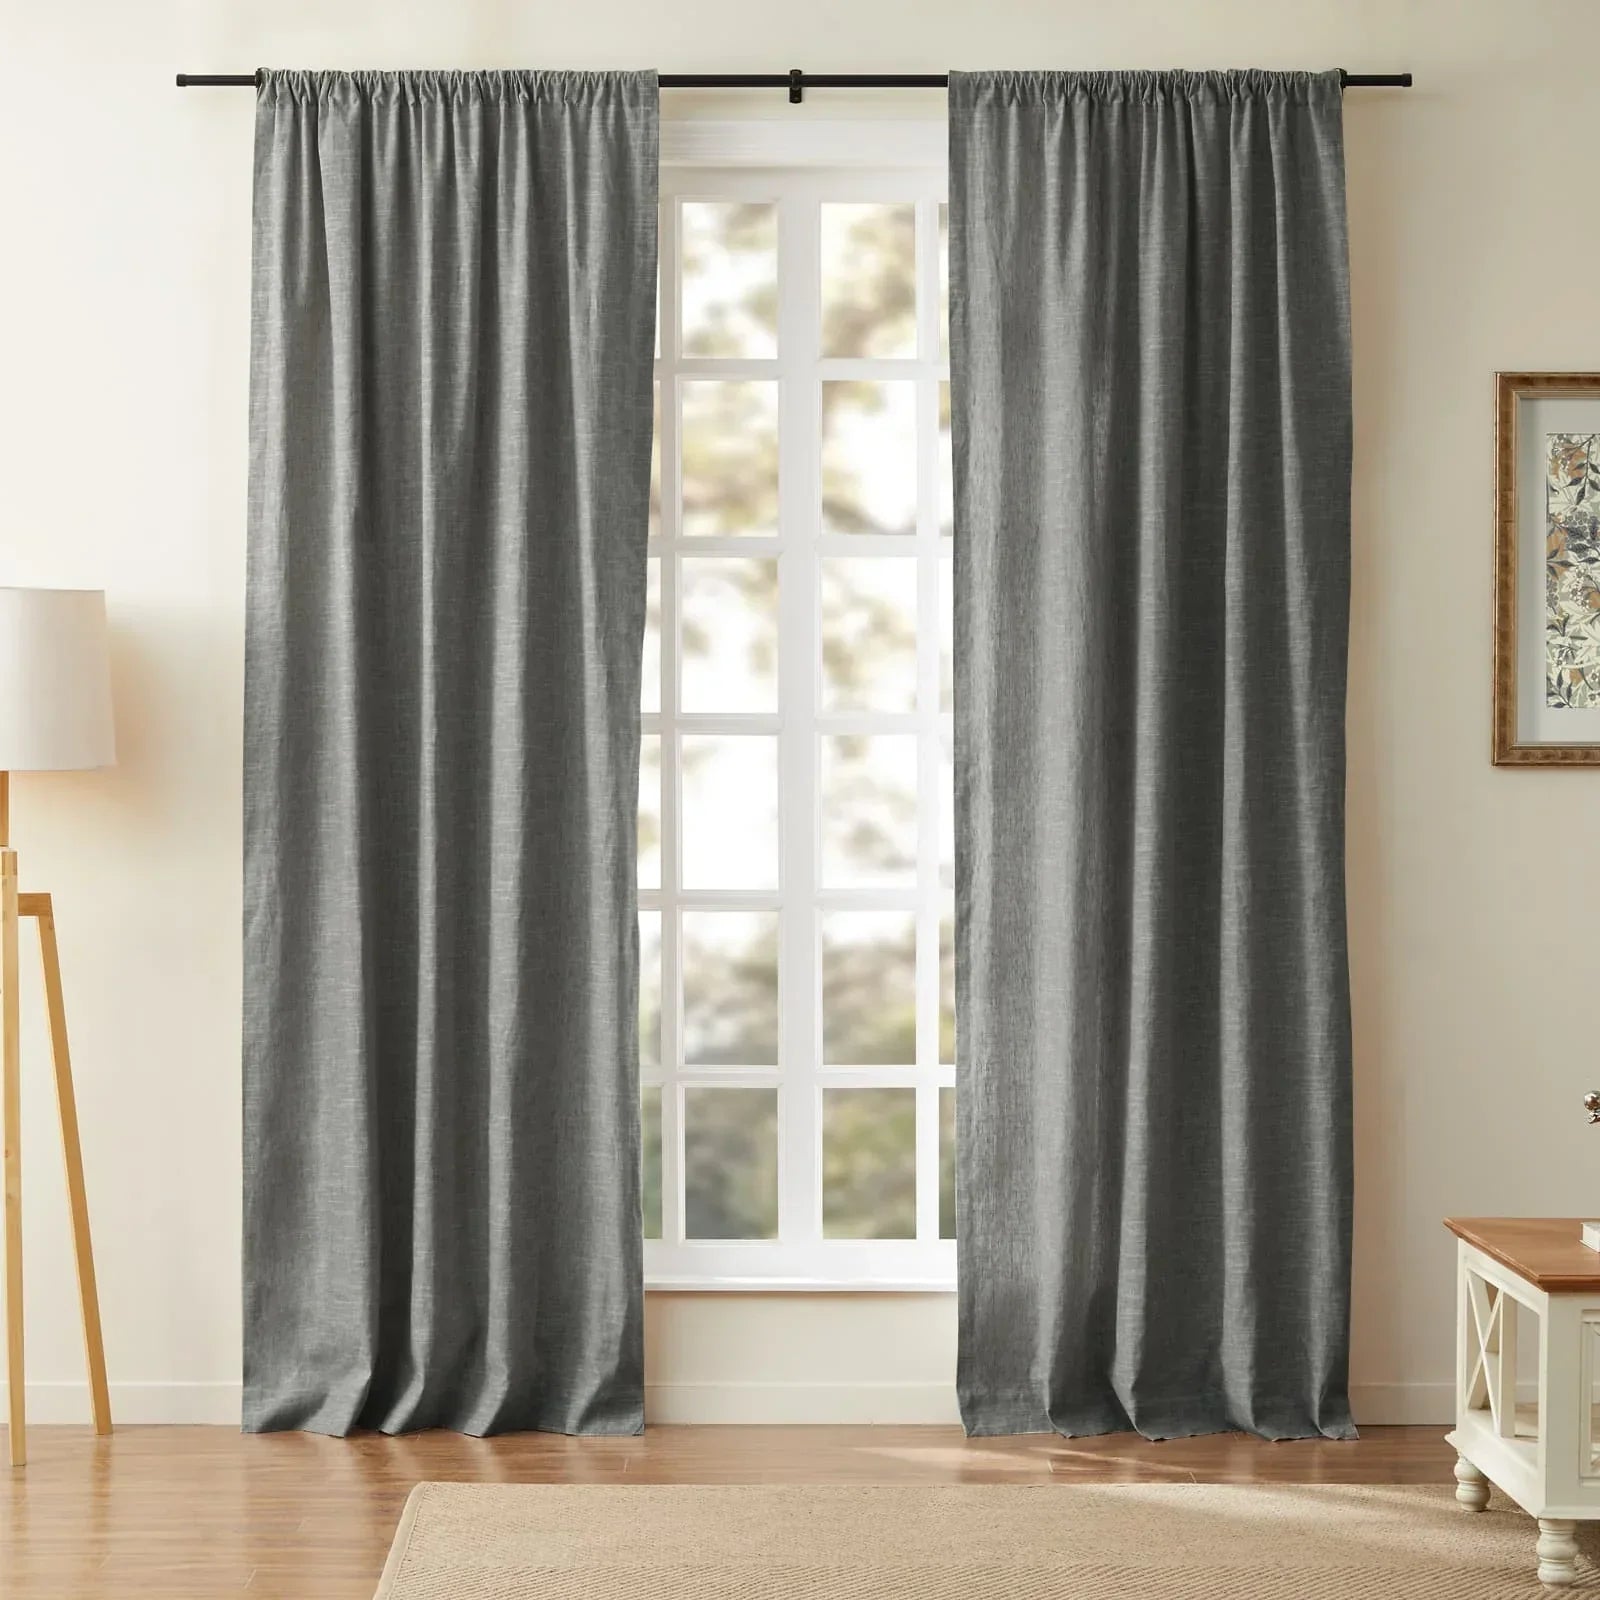 Aira Luxury Linen Cotton Soft Curtain, Bedroom Soft Top 